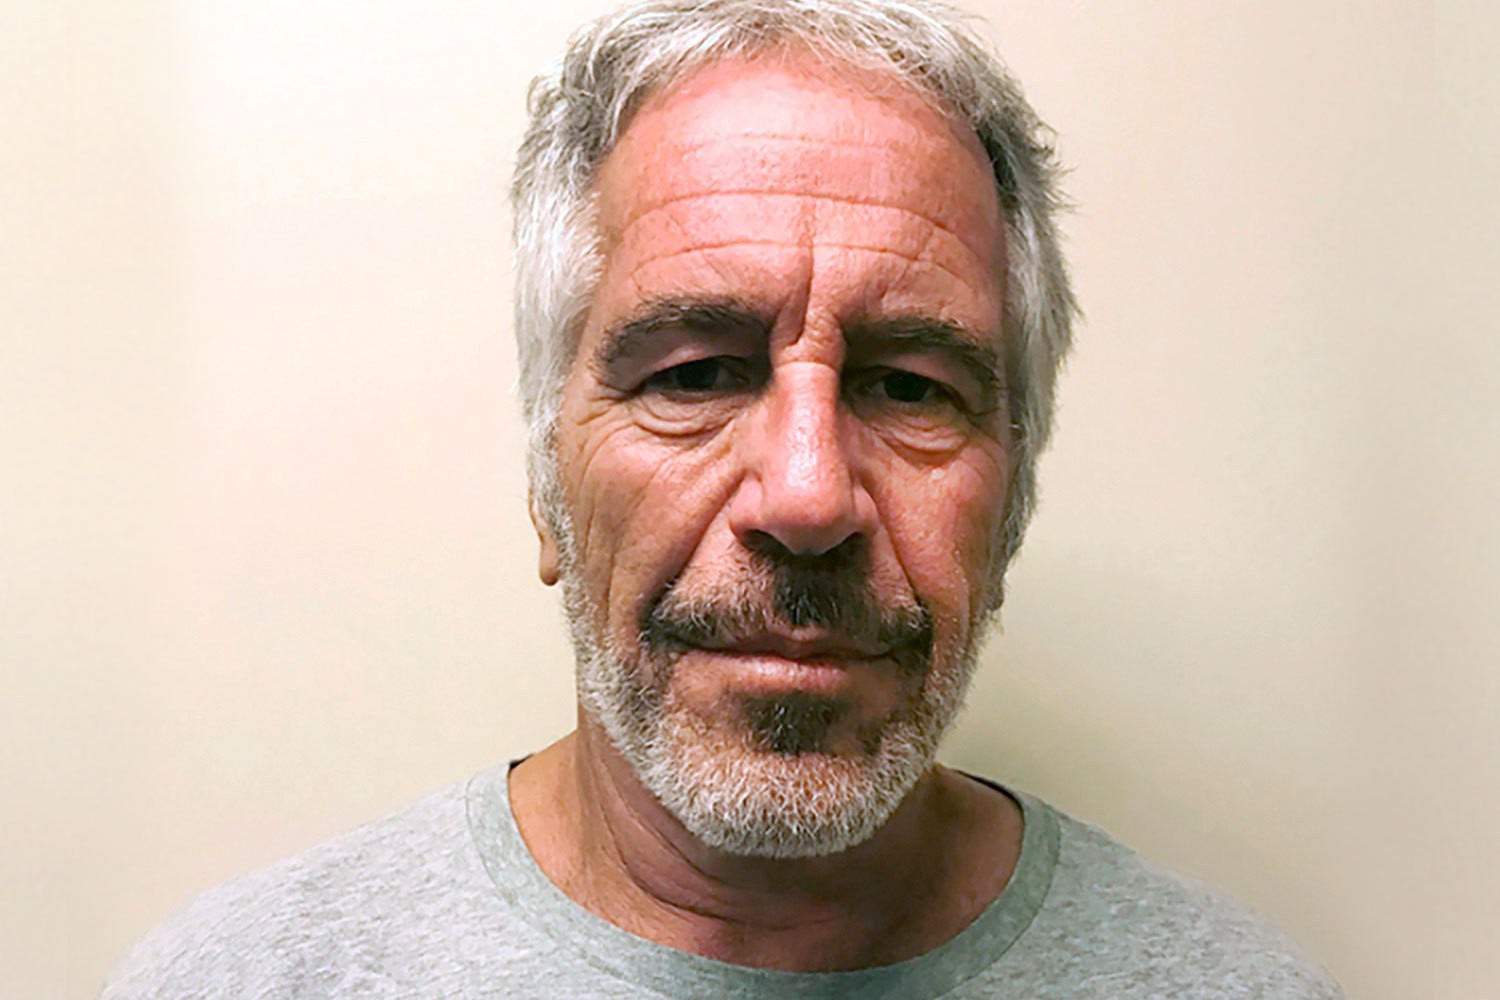 Epstein died while awaiting sex trafficking charges